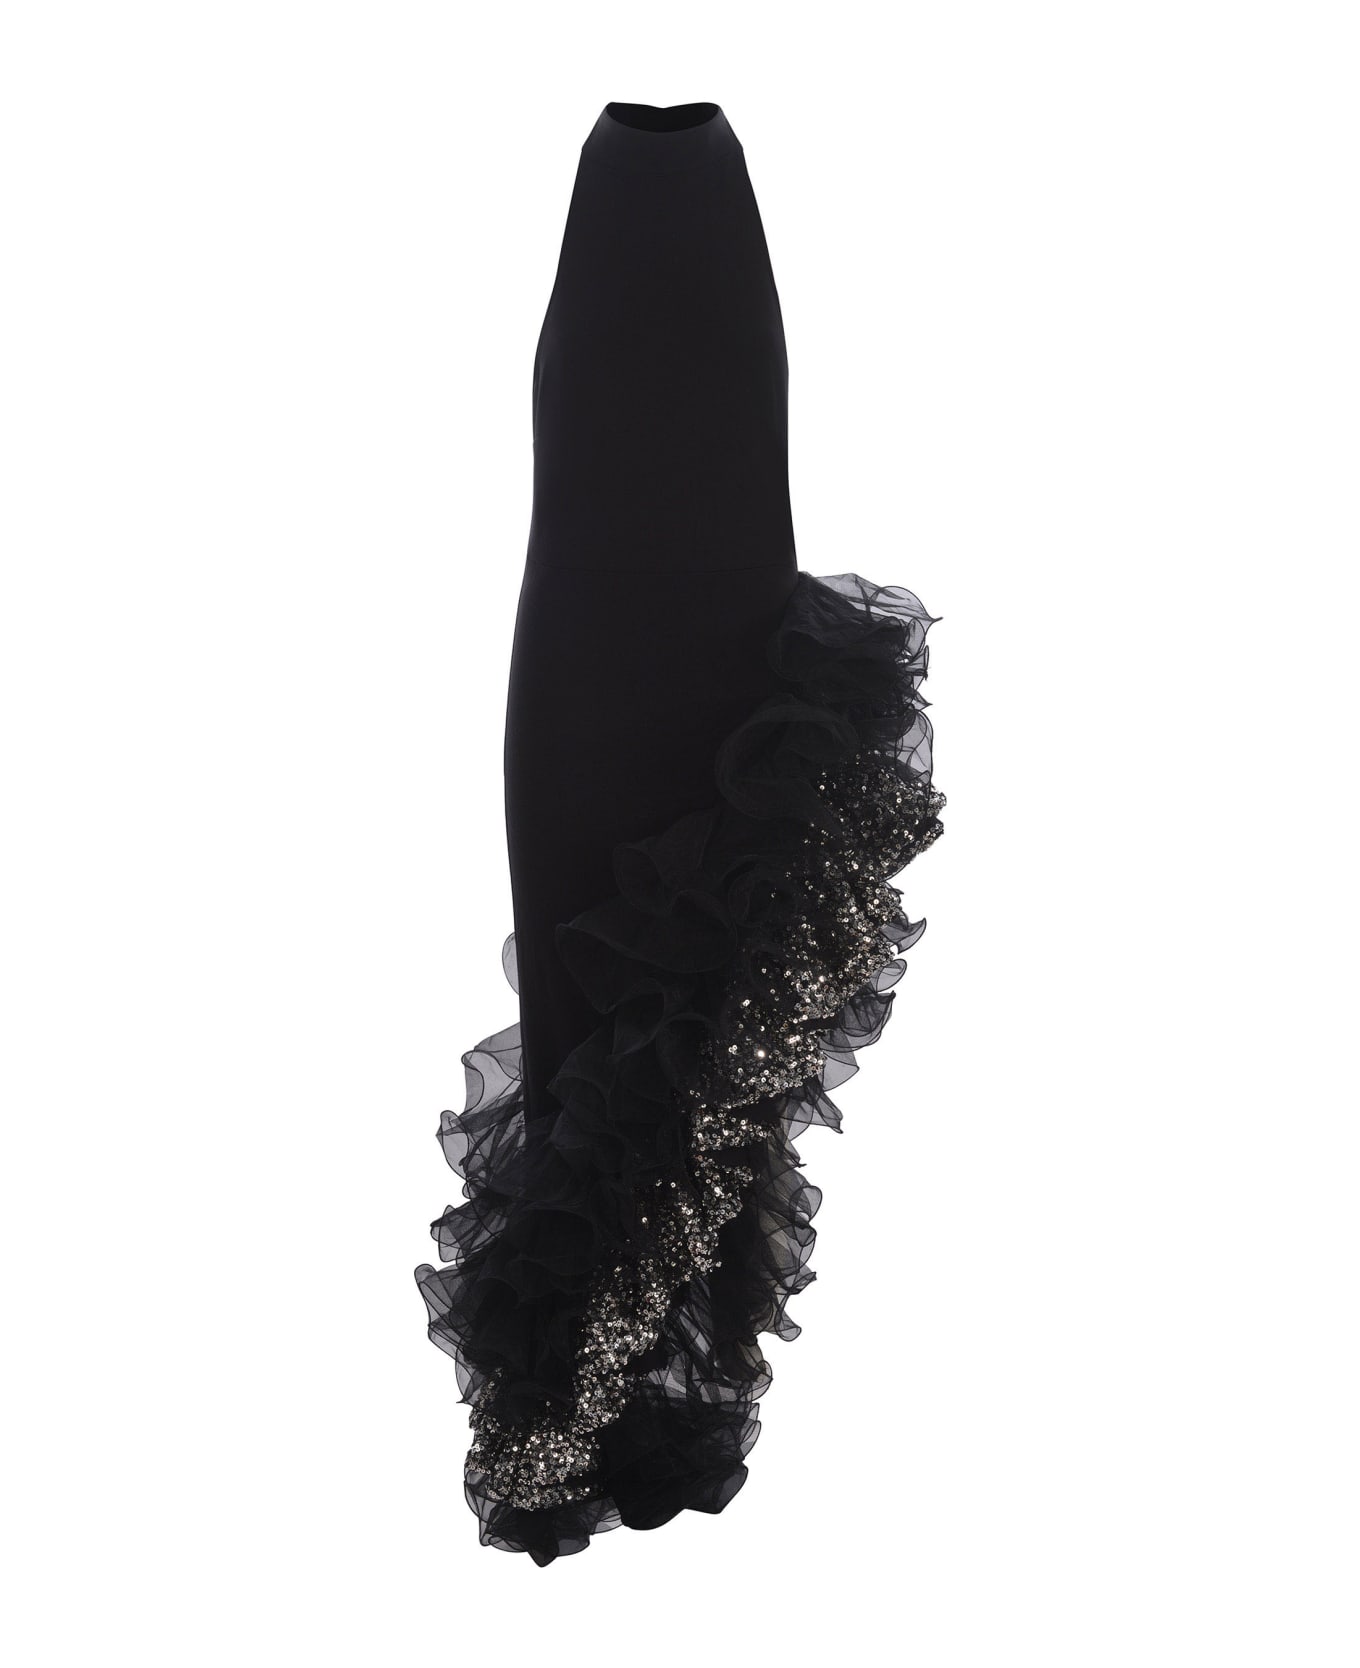 Rotate by Birger Christensen Long Dress Rotate Made With Ruffles And Sequins - Nero